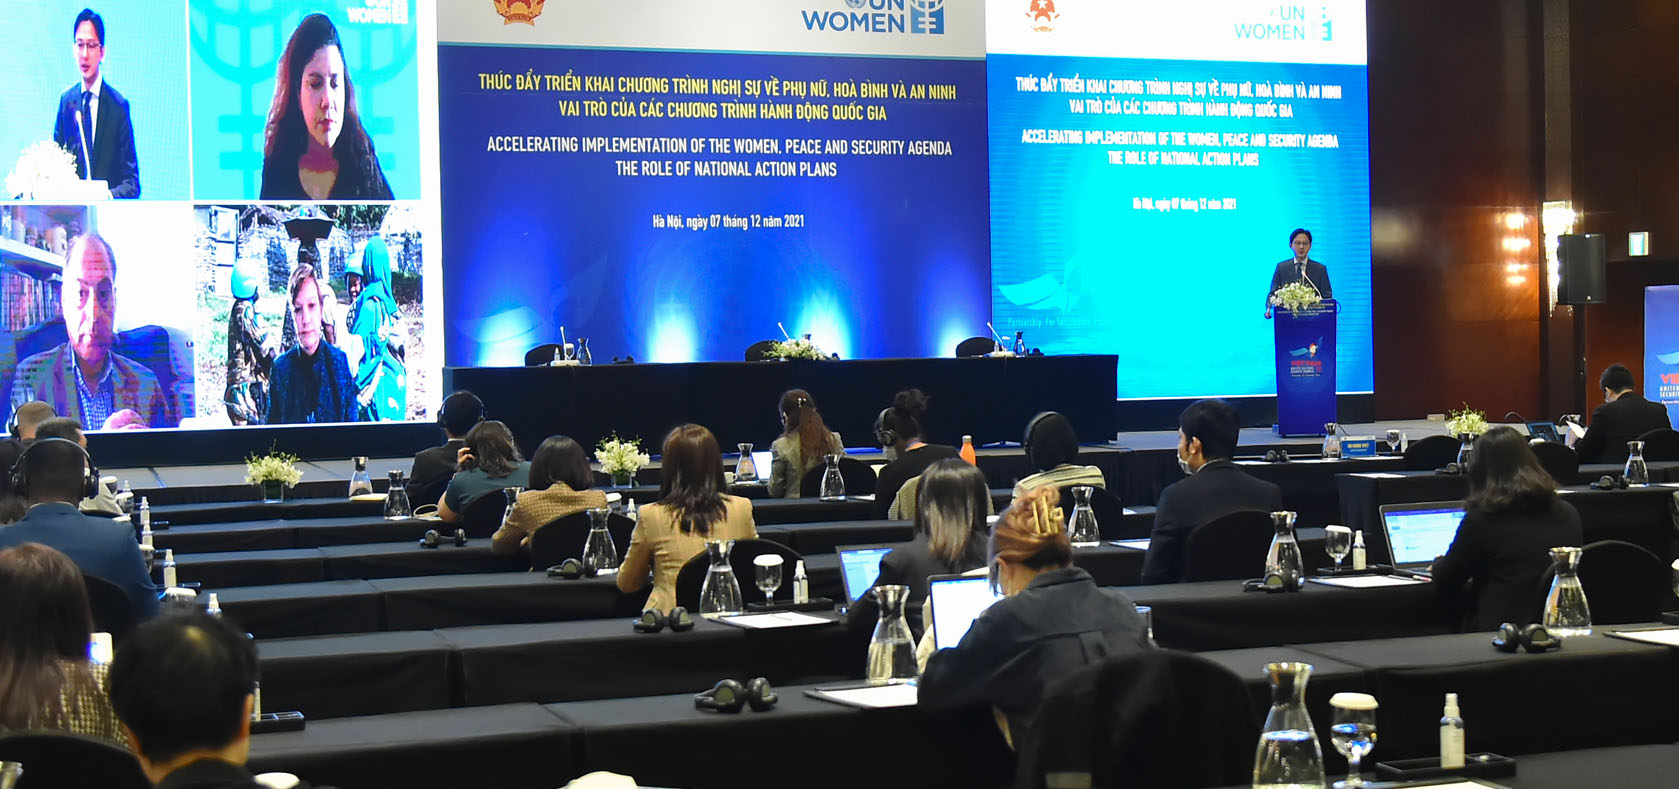 The workshop showed Viet Nam’s efforts in realizing its international commitments on Women, Peace and Security. Photo: UN Women/Thao Hoang